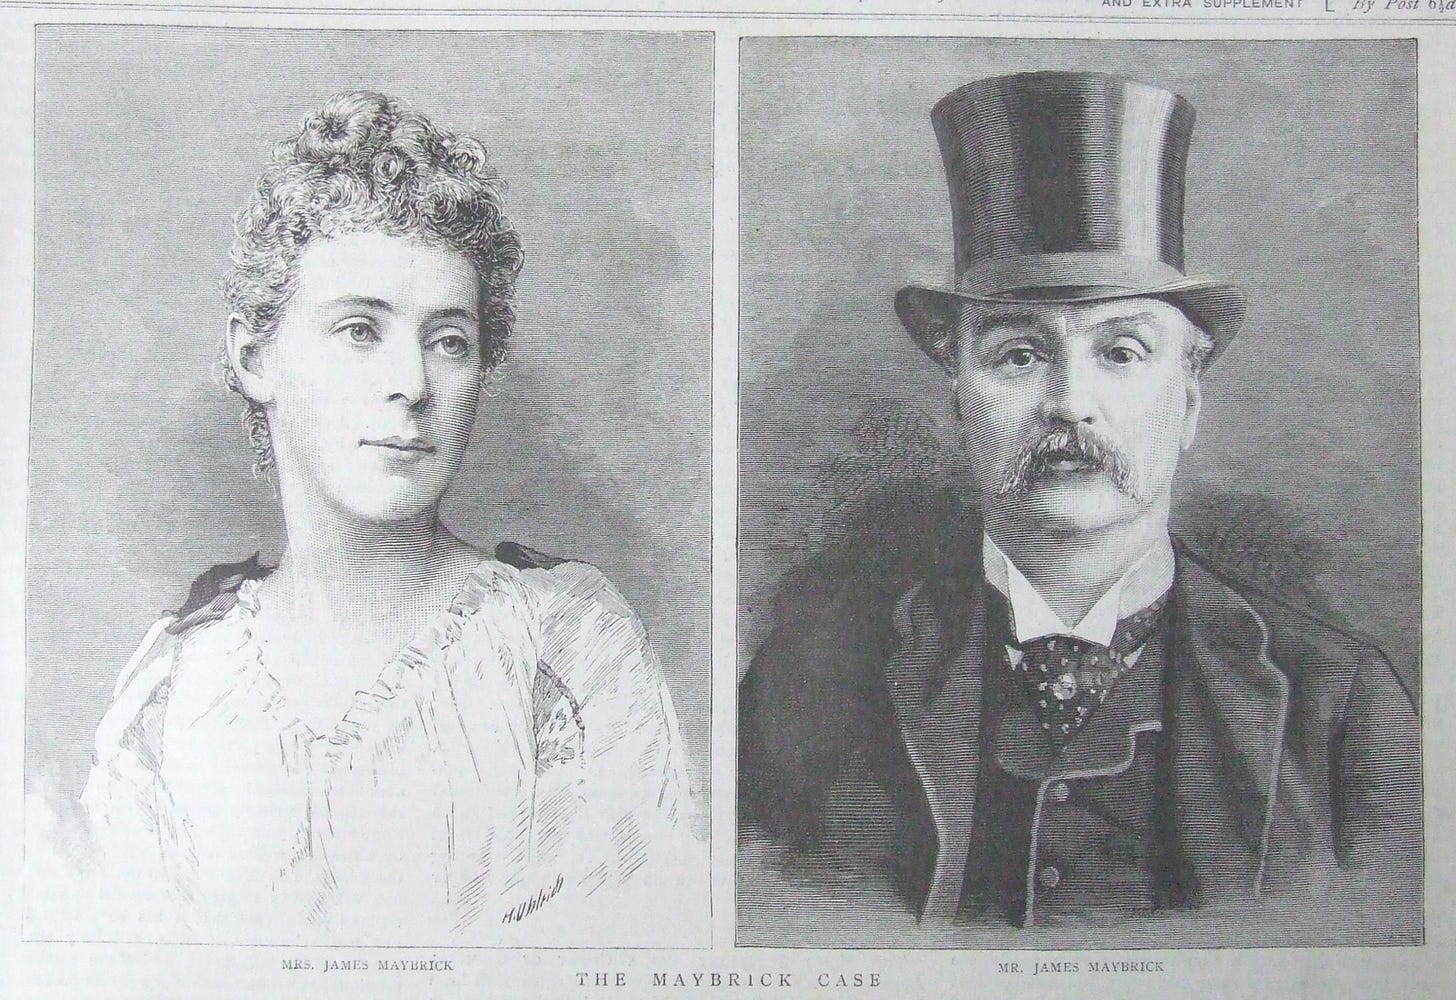 Florence and Jame Maybrick both may have been killers